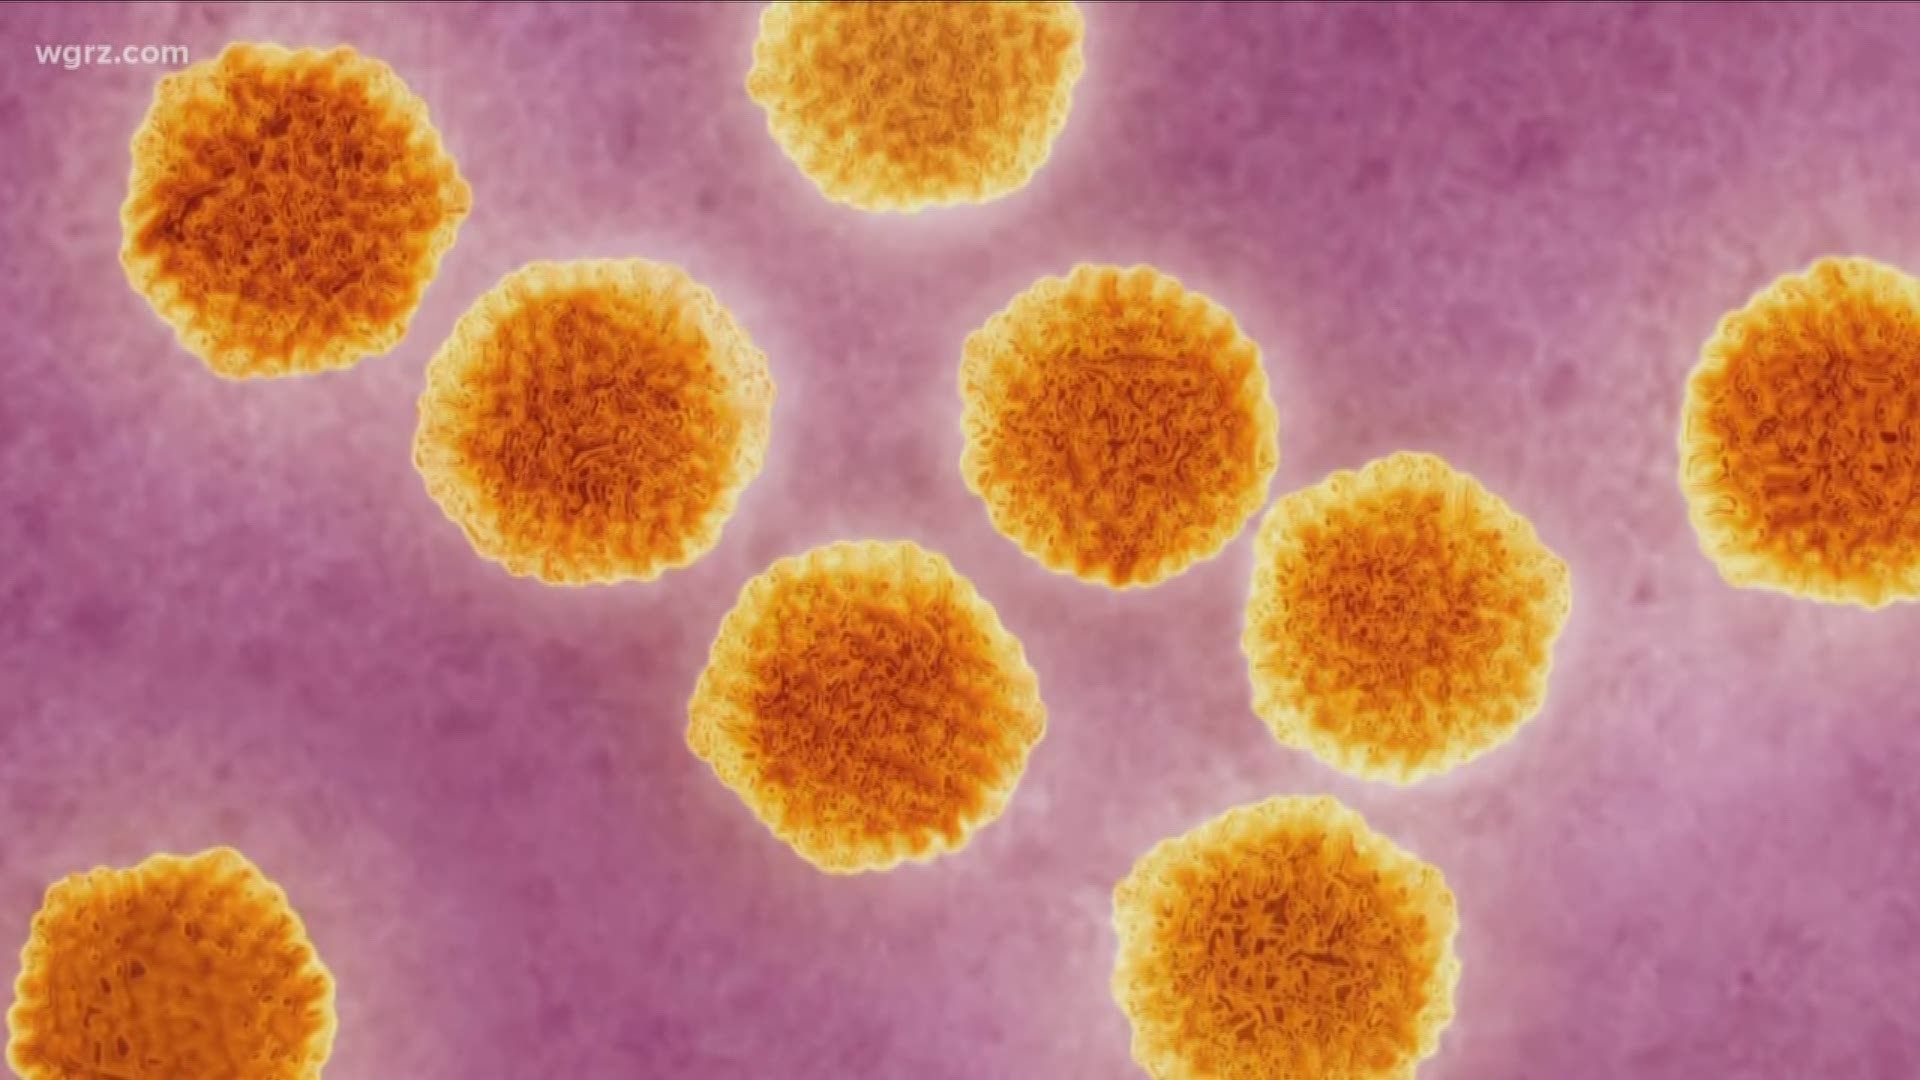 A health scare in the city of Buffalo  with another confirmed case of hepatitis A at a restaurant. This case involves a worker at platinum pizza on Broadway.